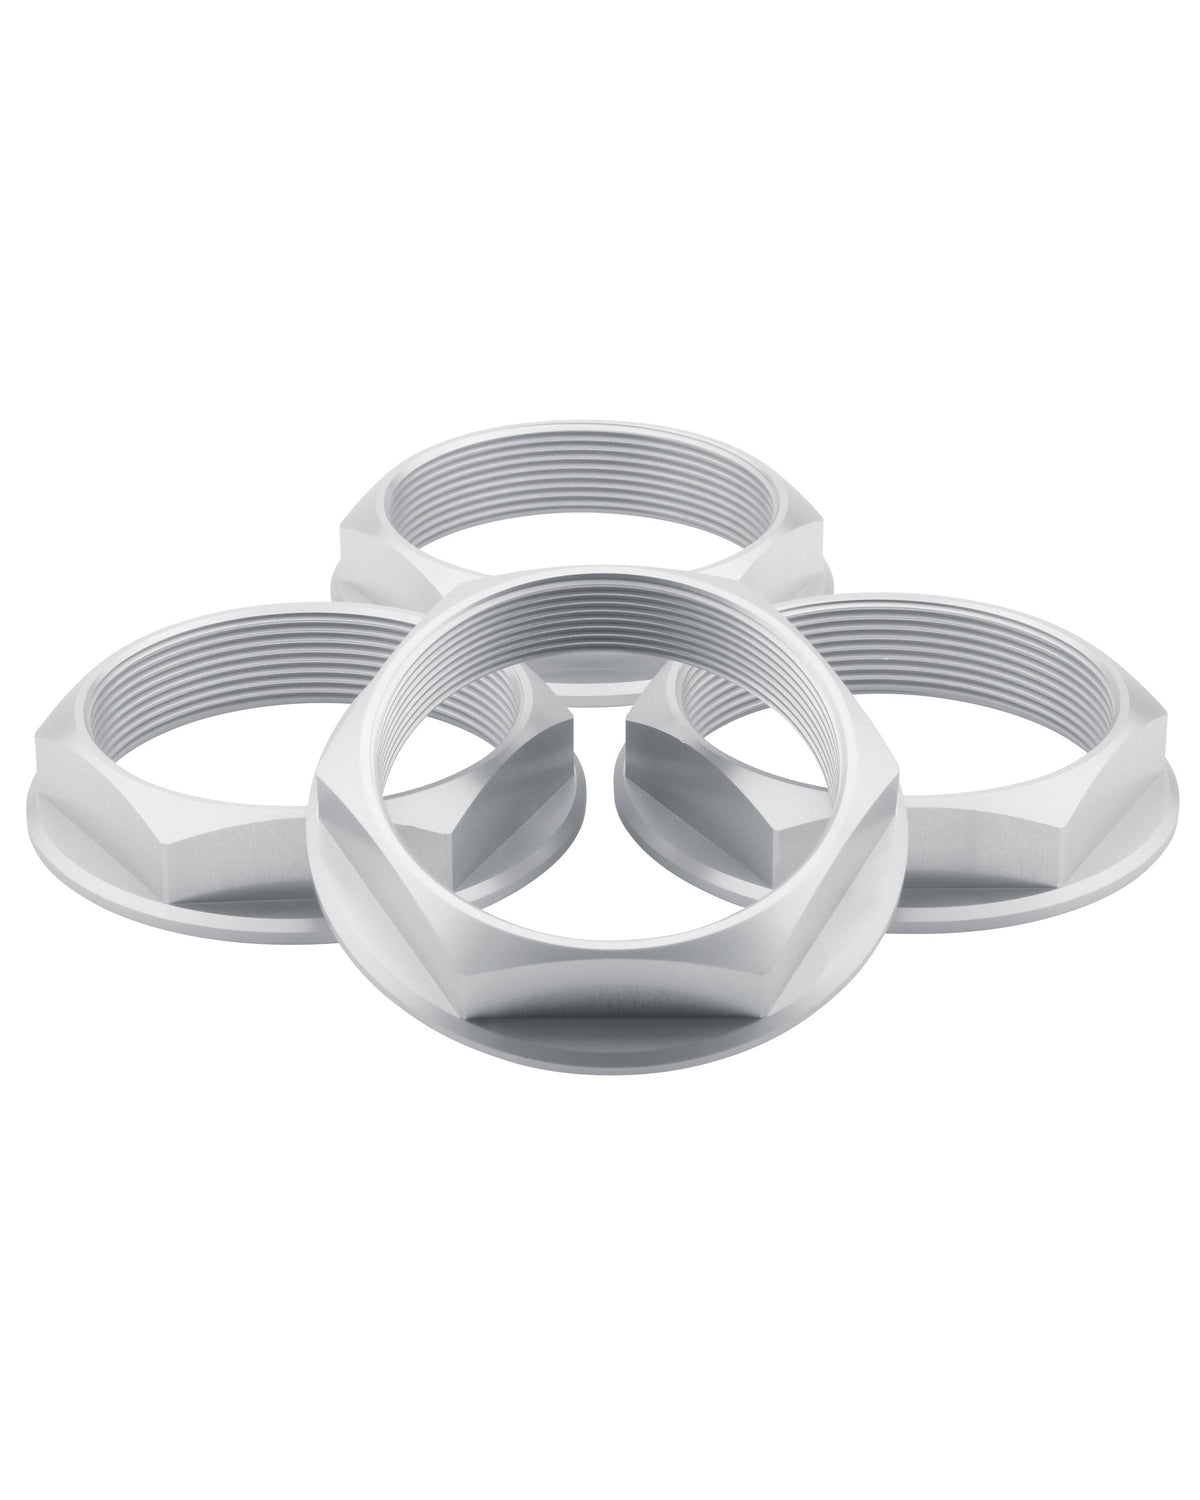 Super Touring Hex Nut Set _ Anodized Silver